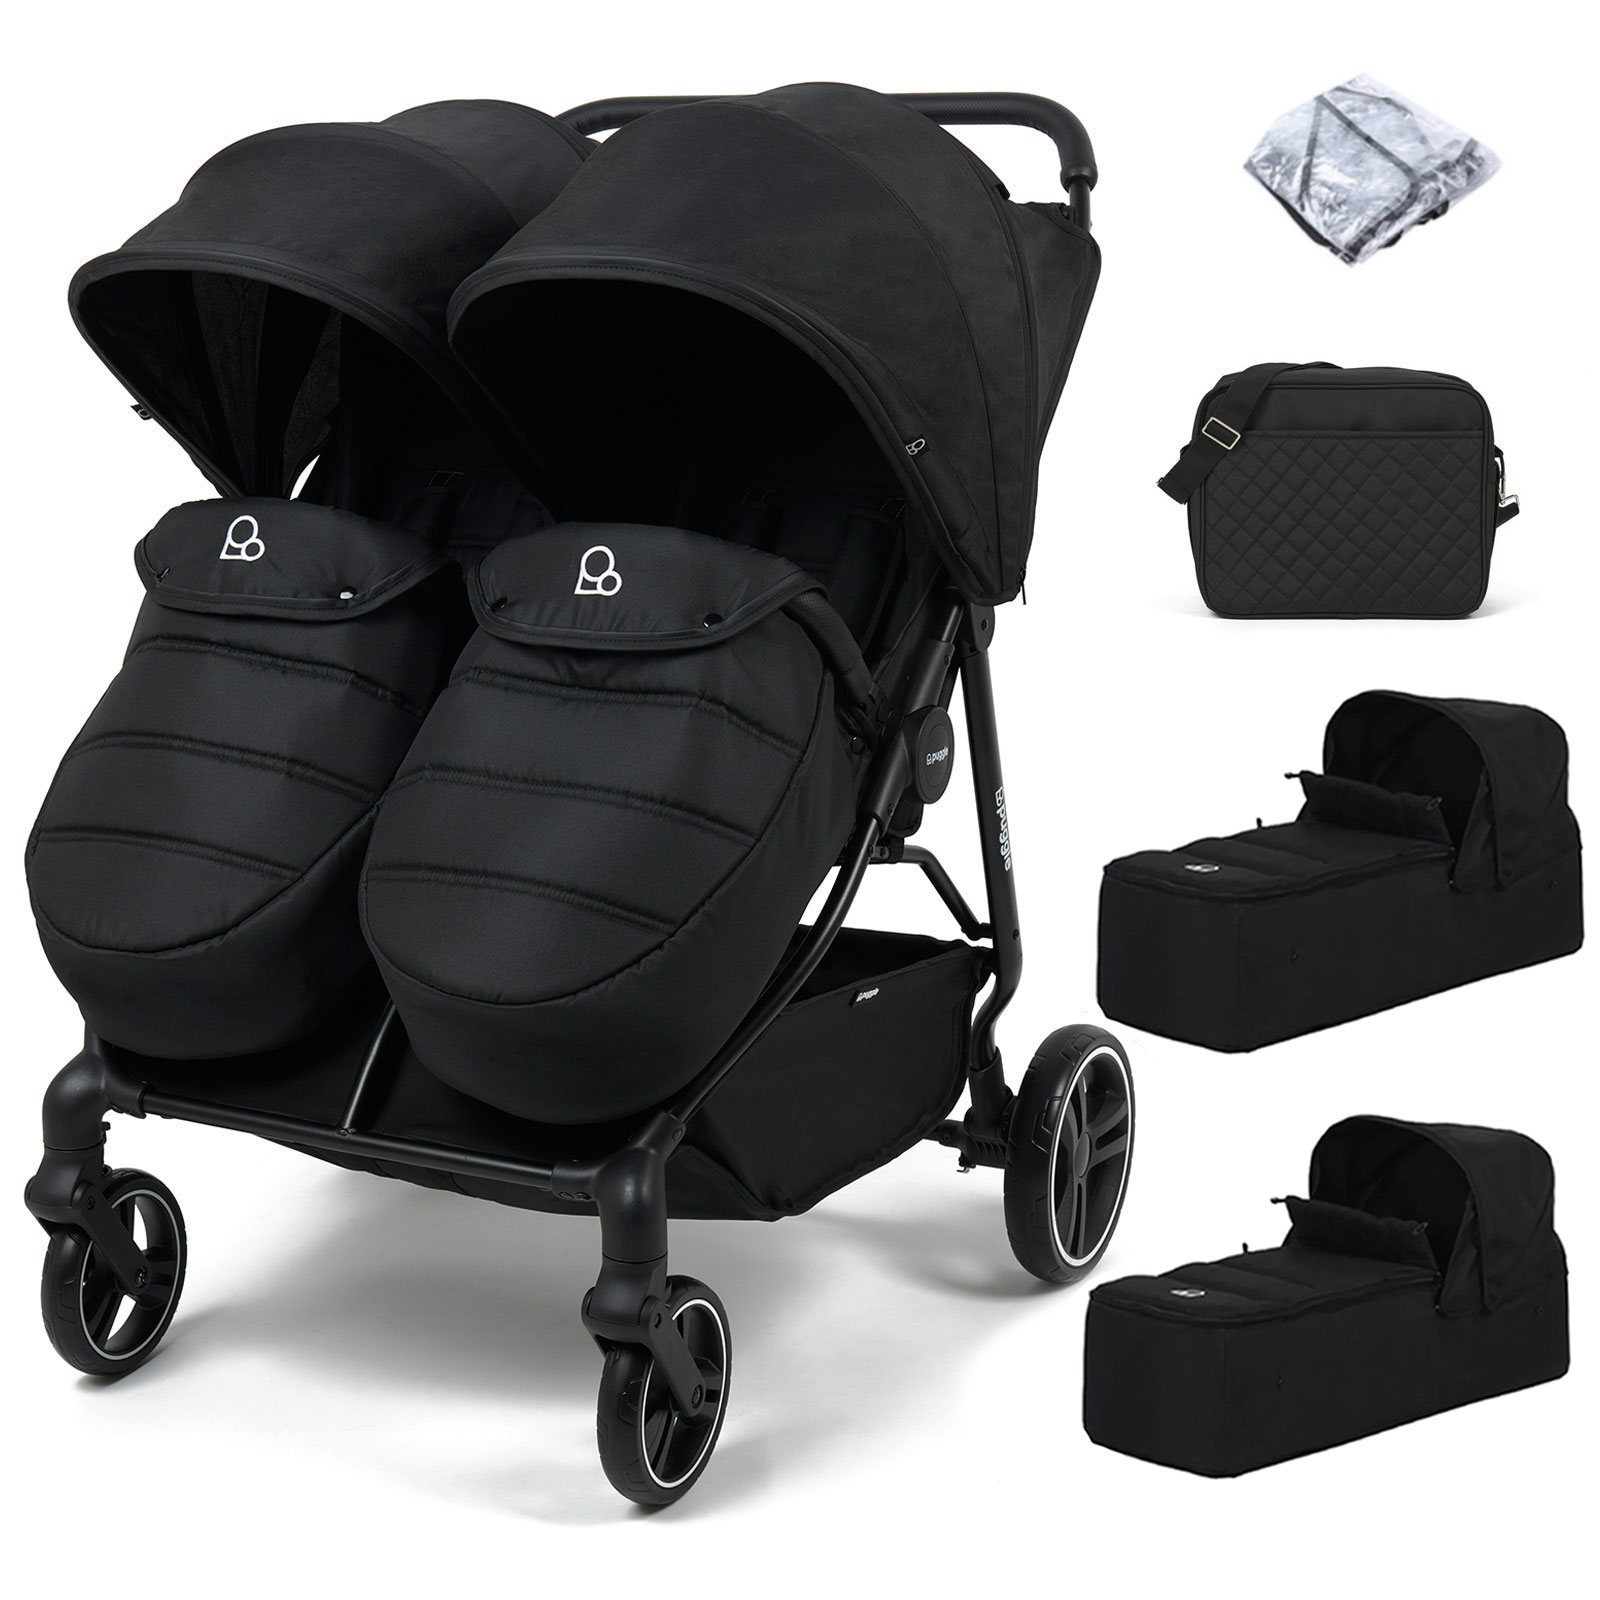 Puggle Urban City Easyfold Twin Pushchair with Footmuffs, 2 Carrycots & Changing Bag - Storm Black